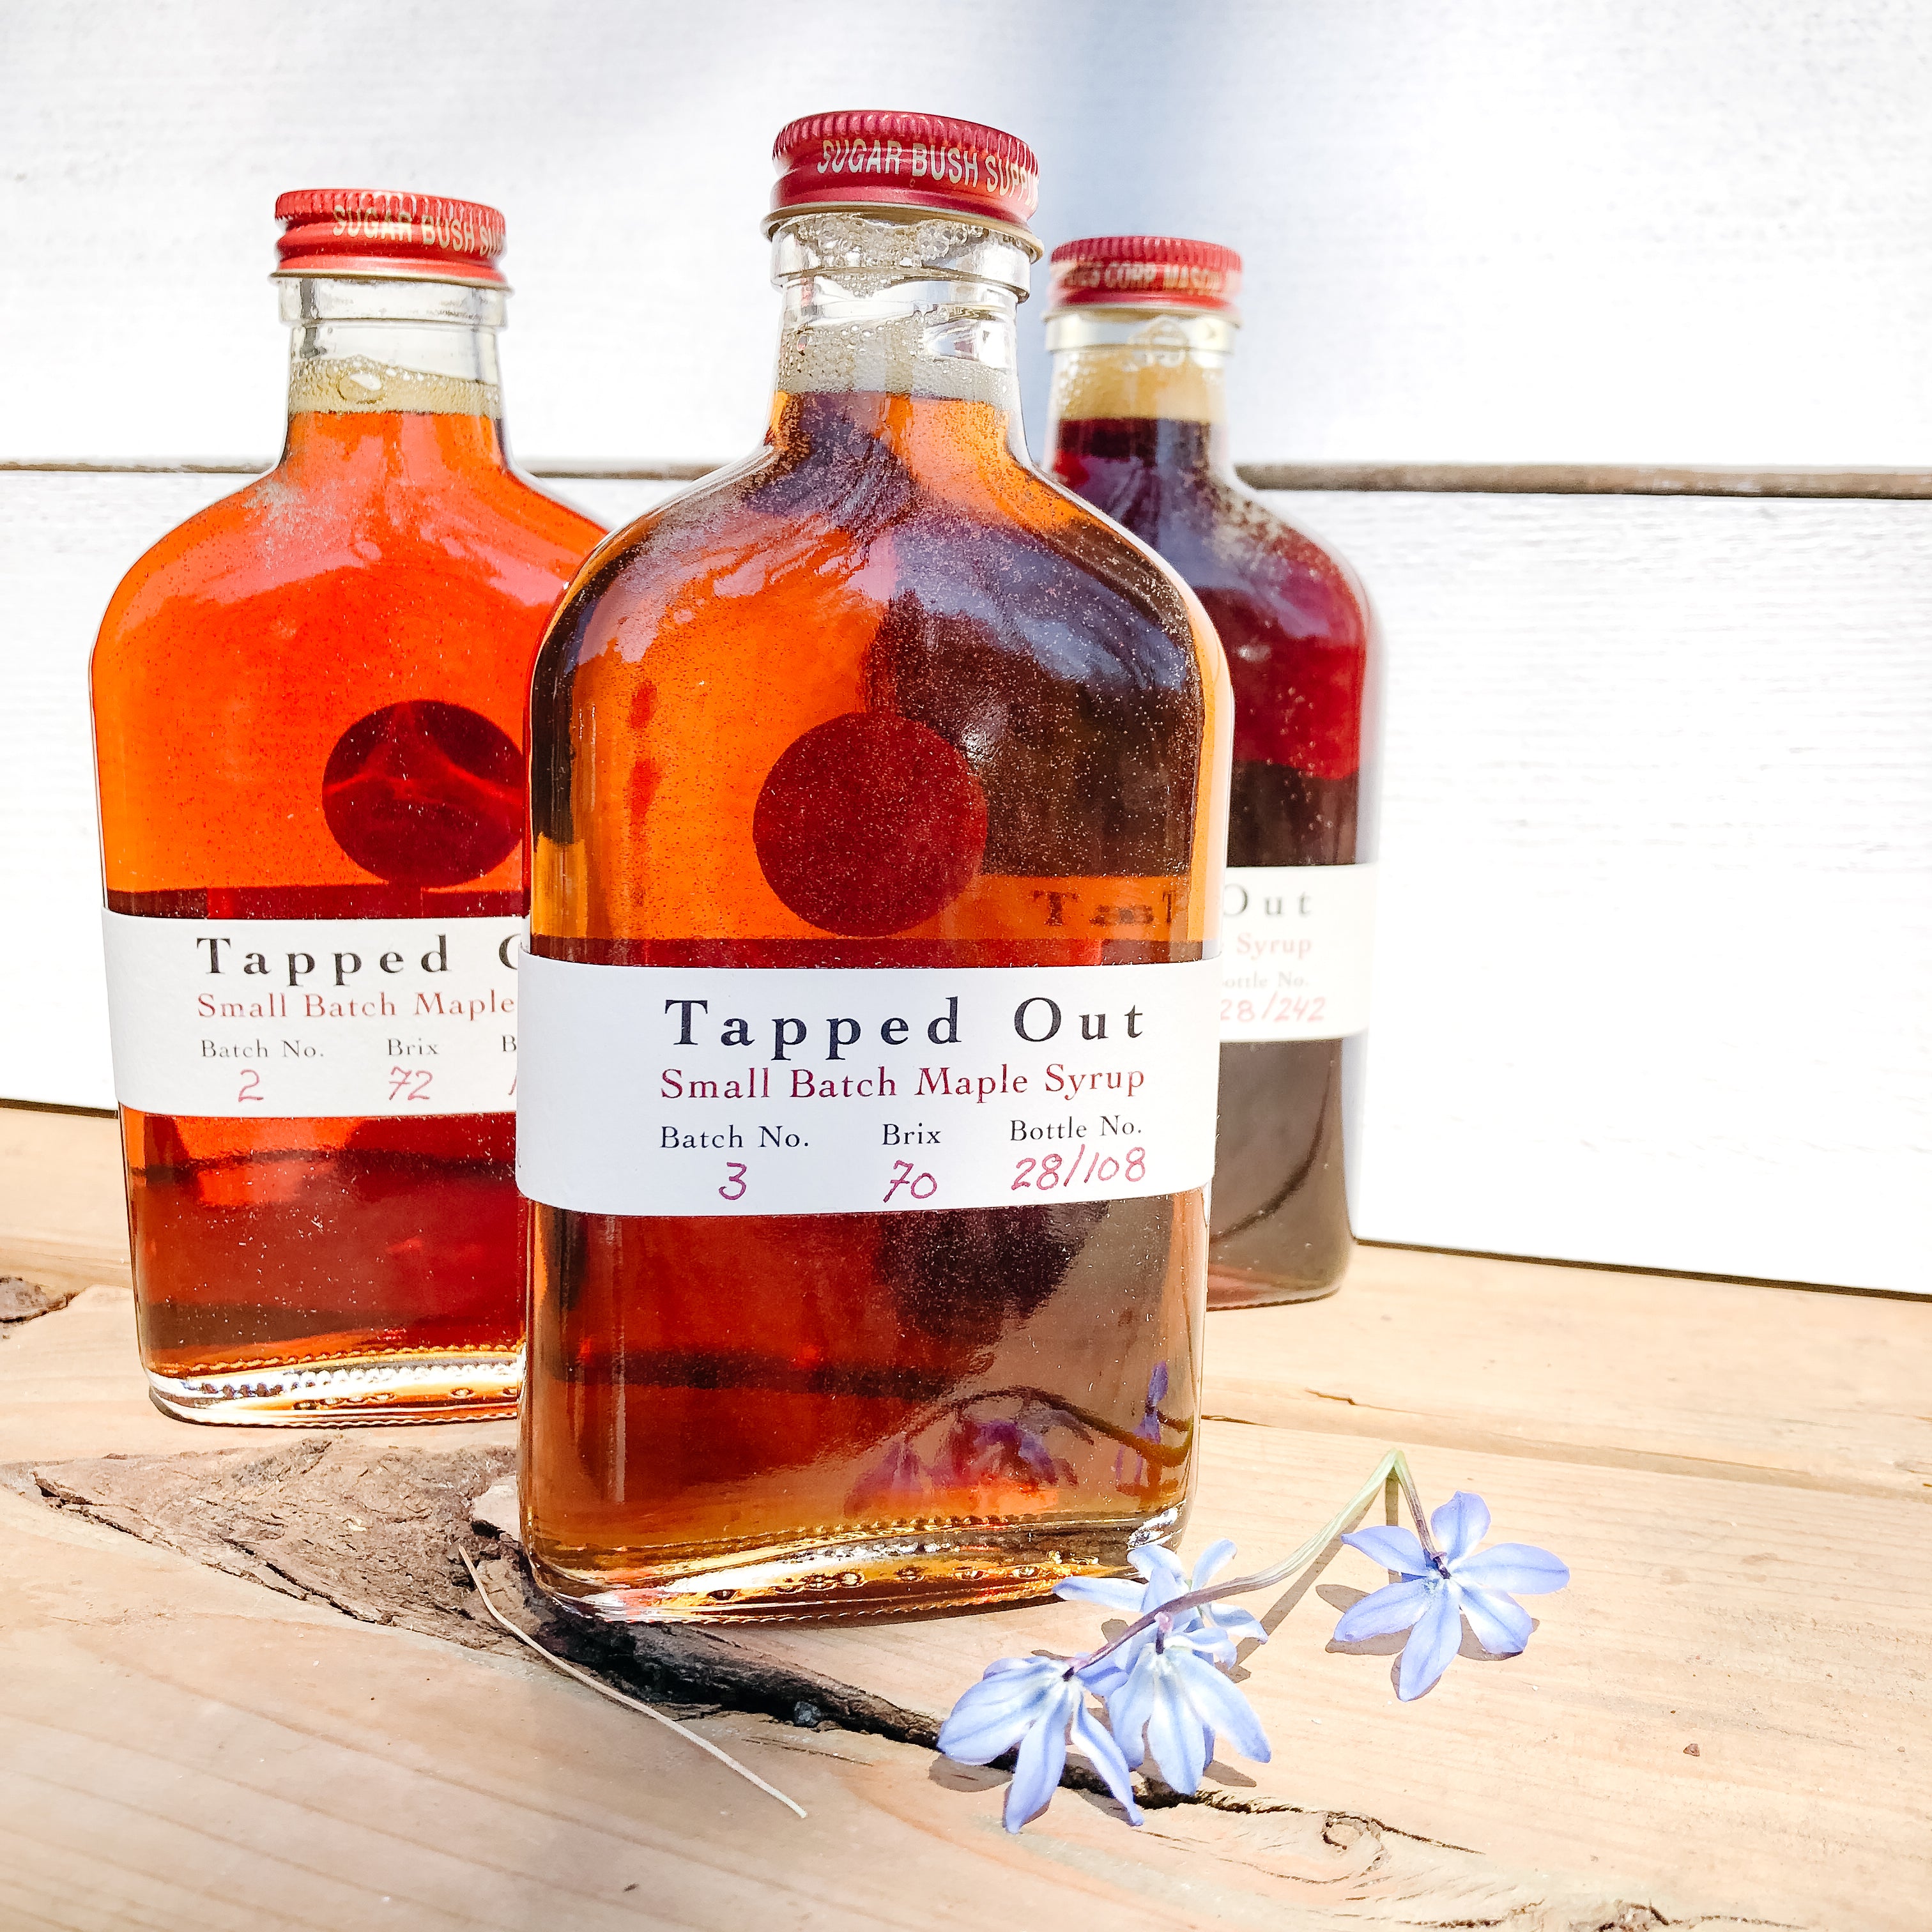 Tapped Out Small-Batch Maple Syrup